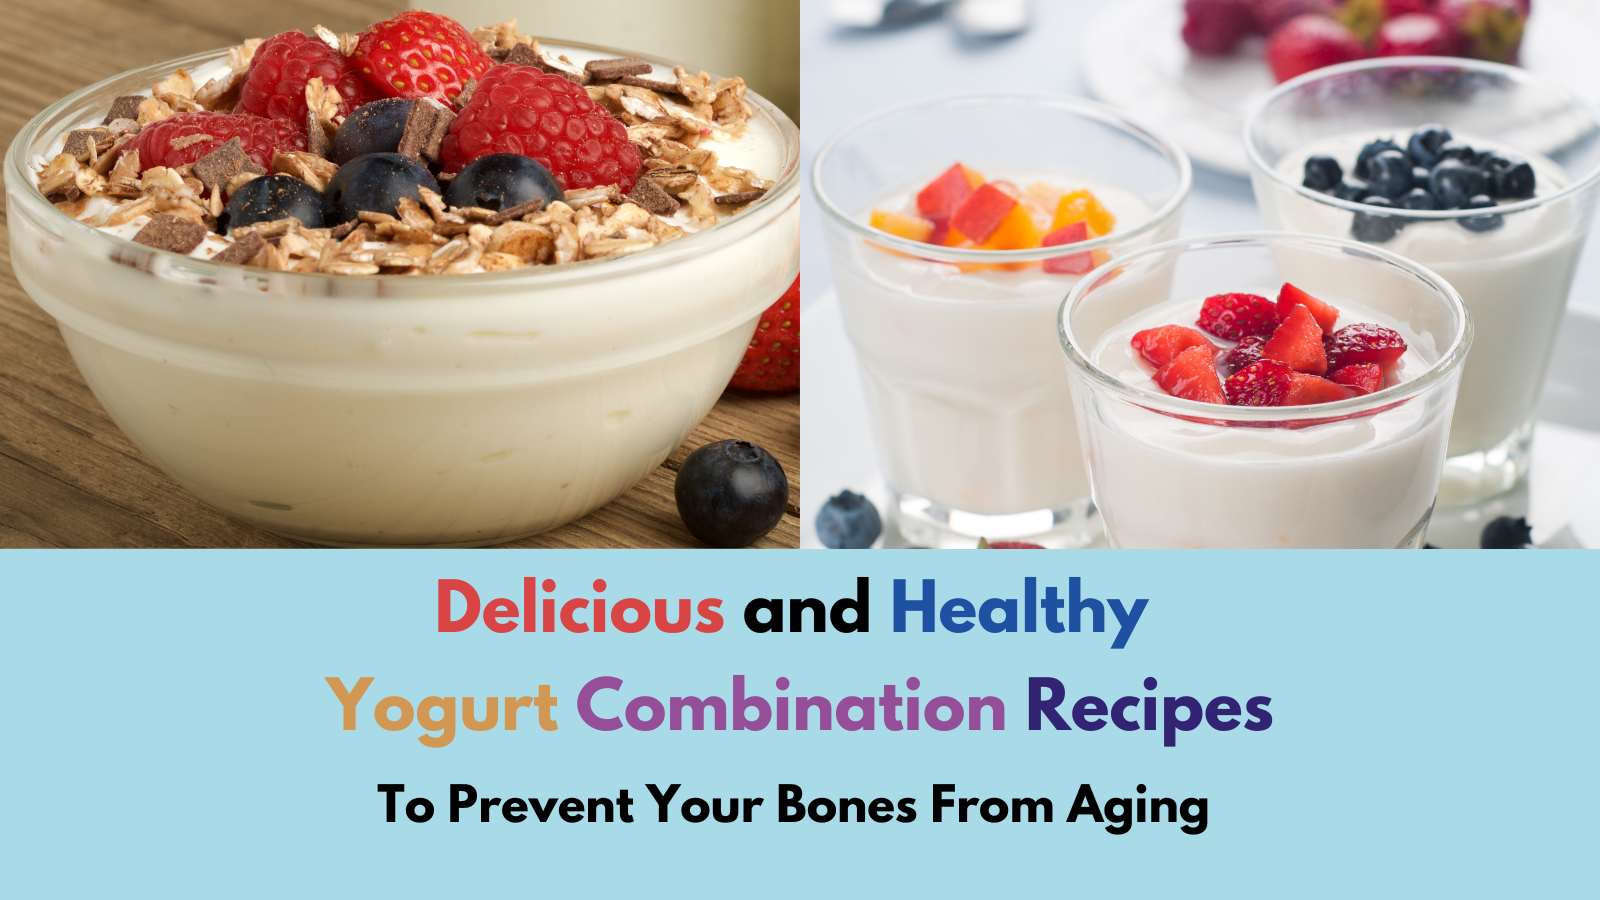 Yogurt Combination To Prevent Your Bones From Aging